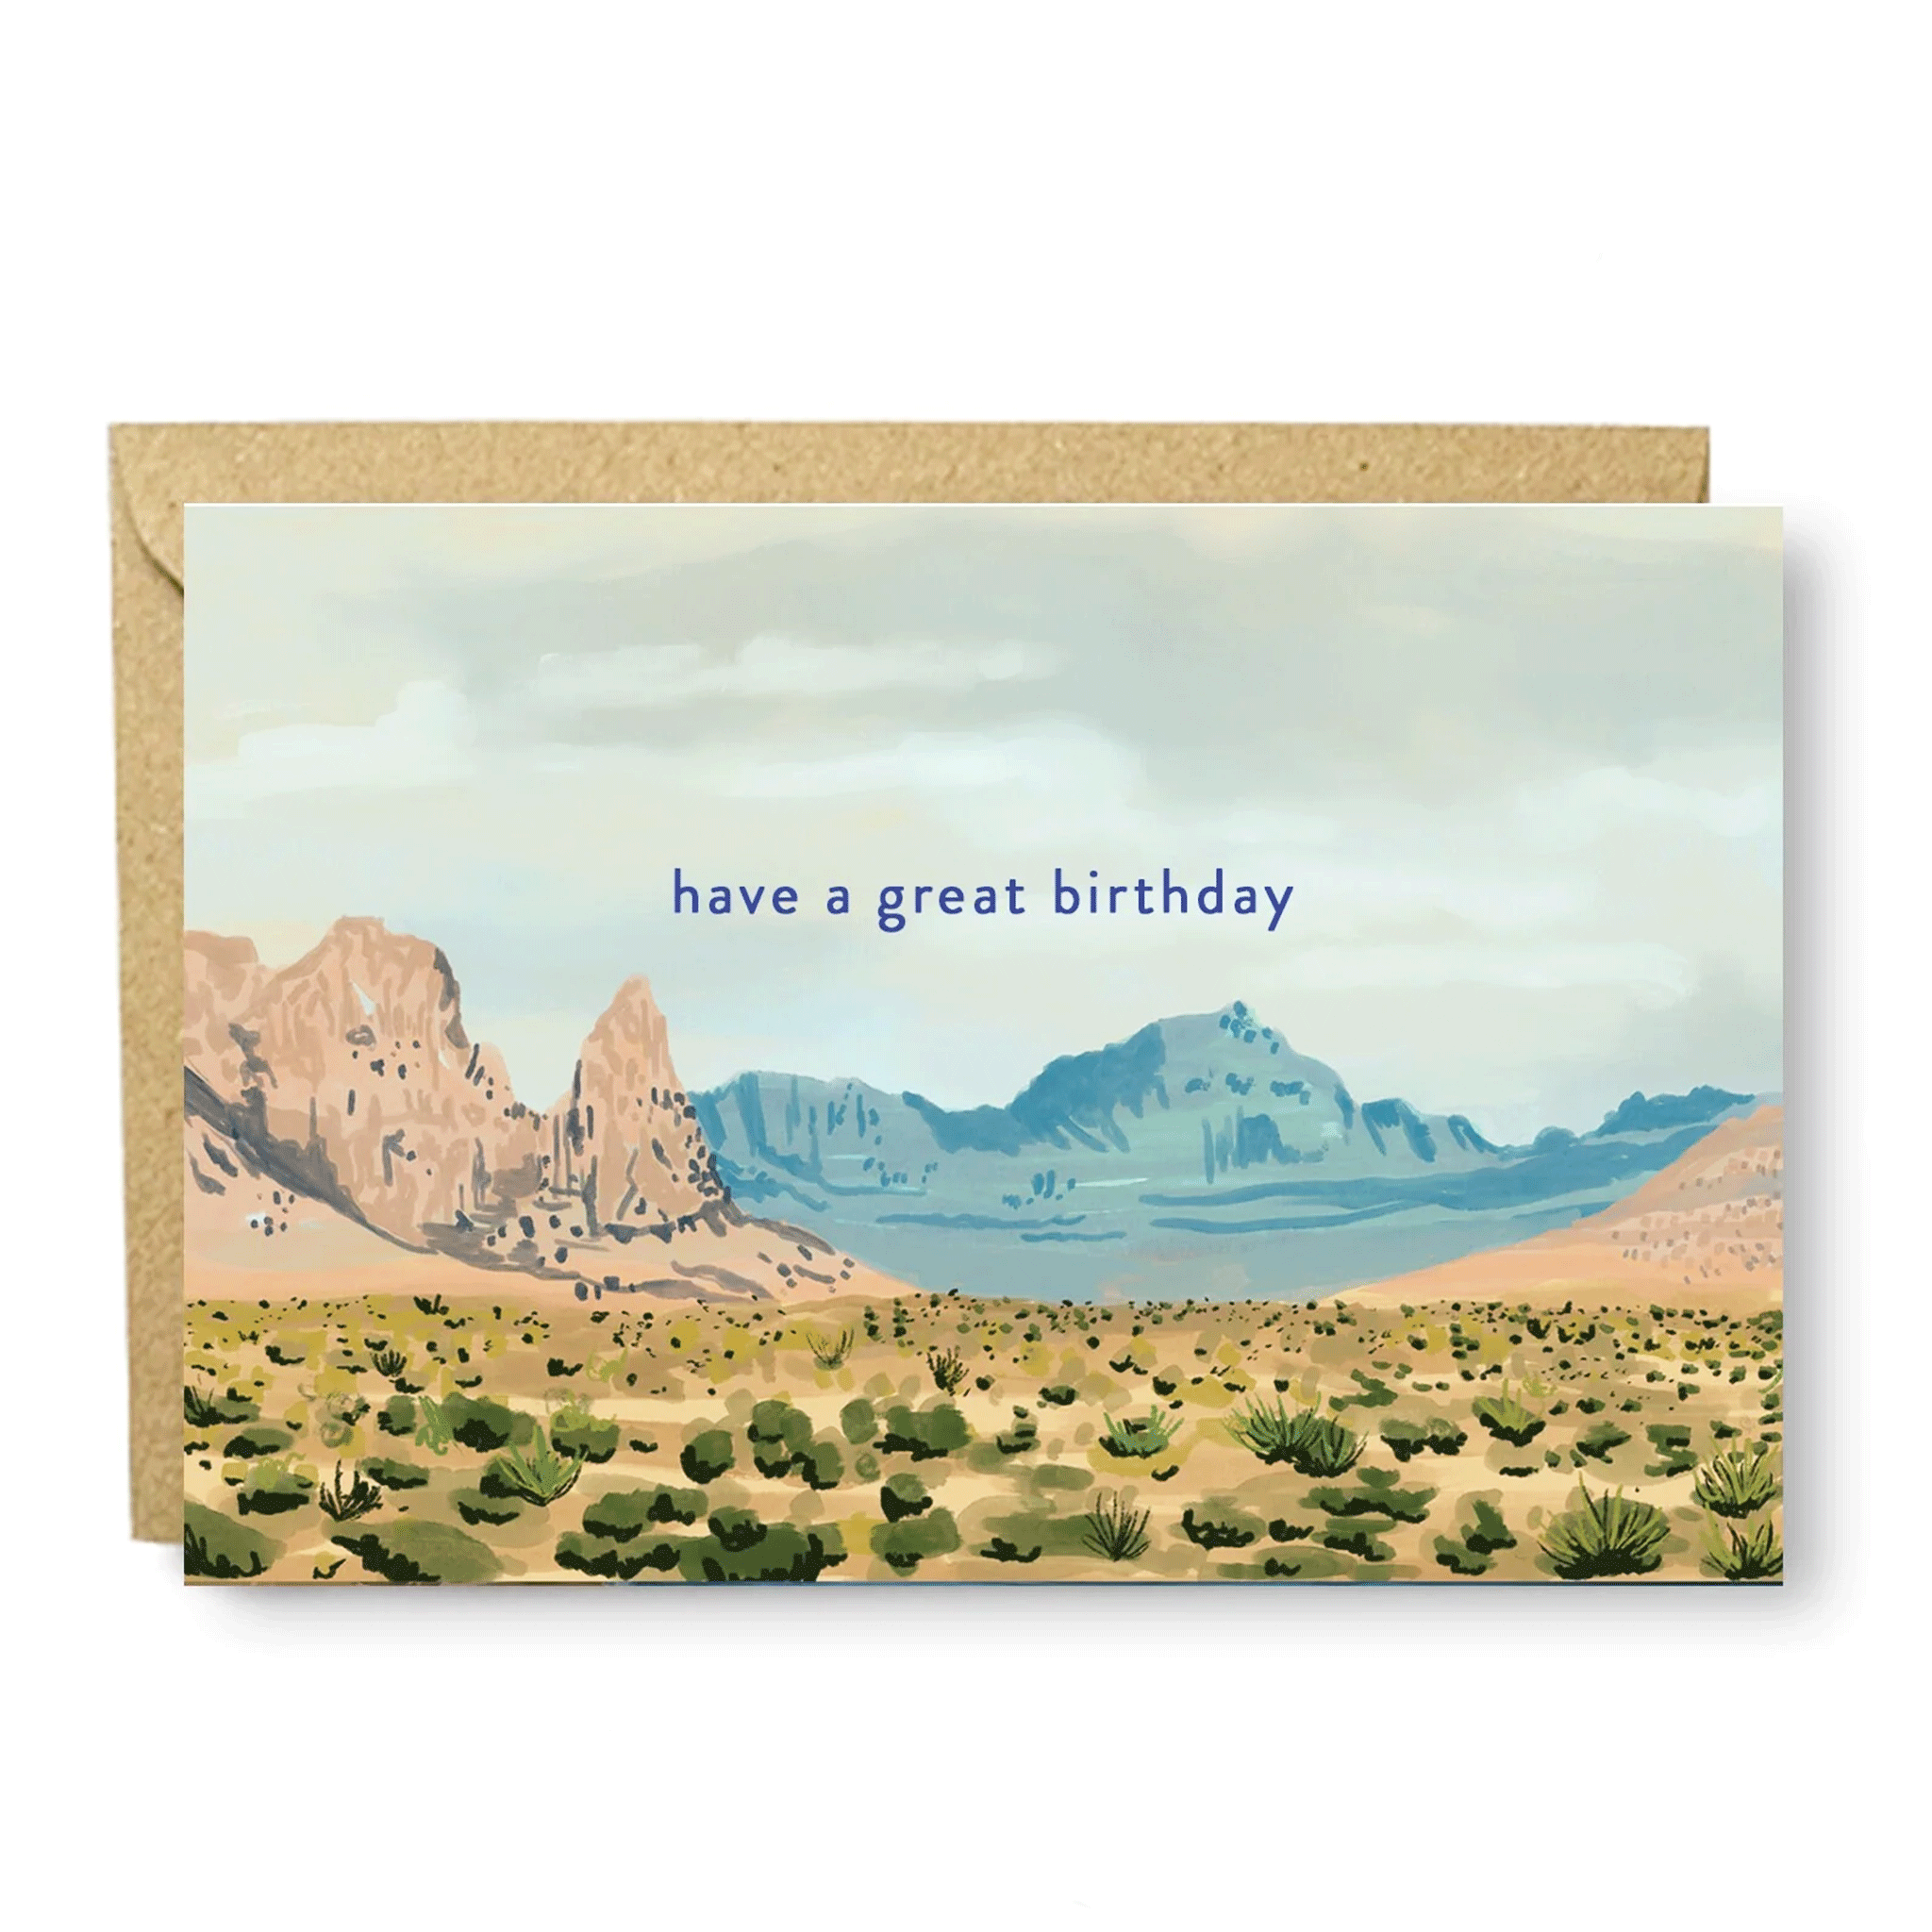 On a white background is a greeting card with a Nevada inspired landscape with text in the center that reads, "have a great birthday".